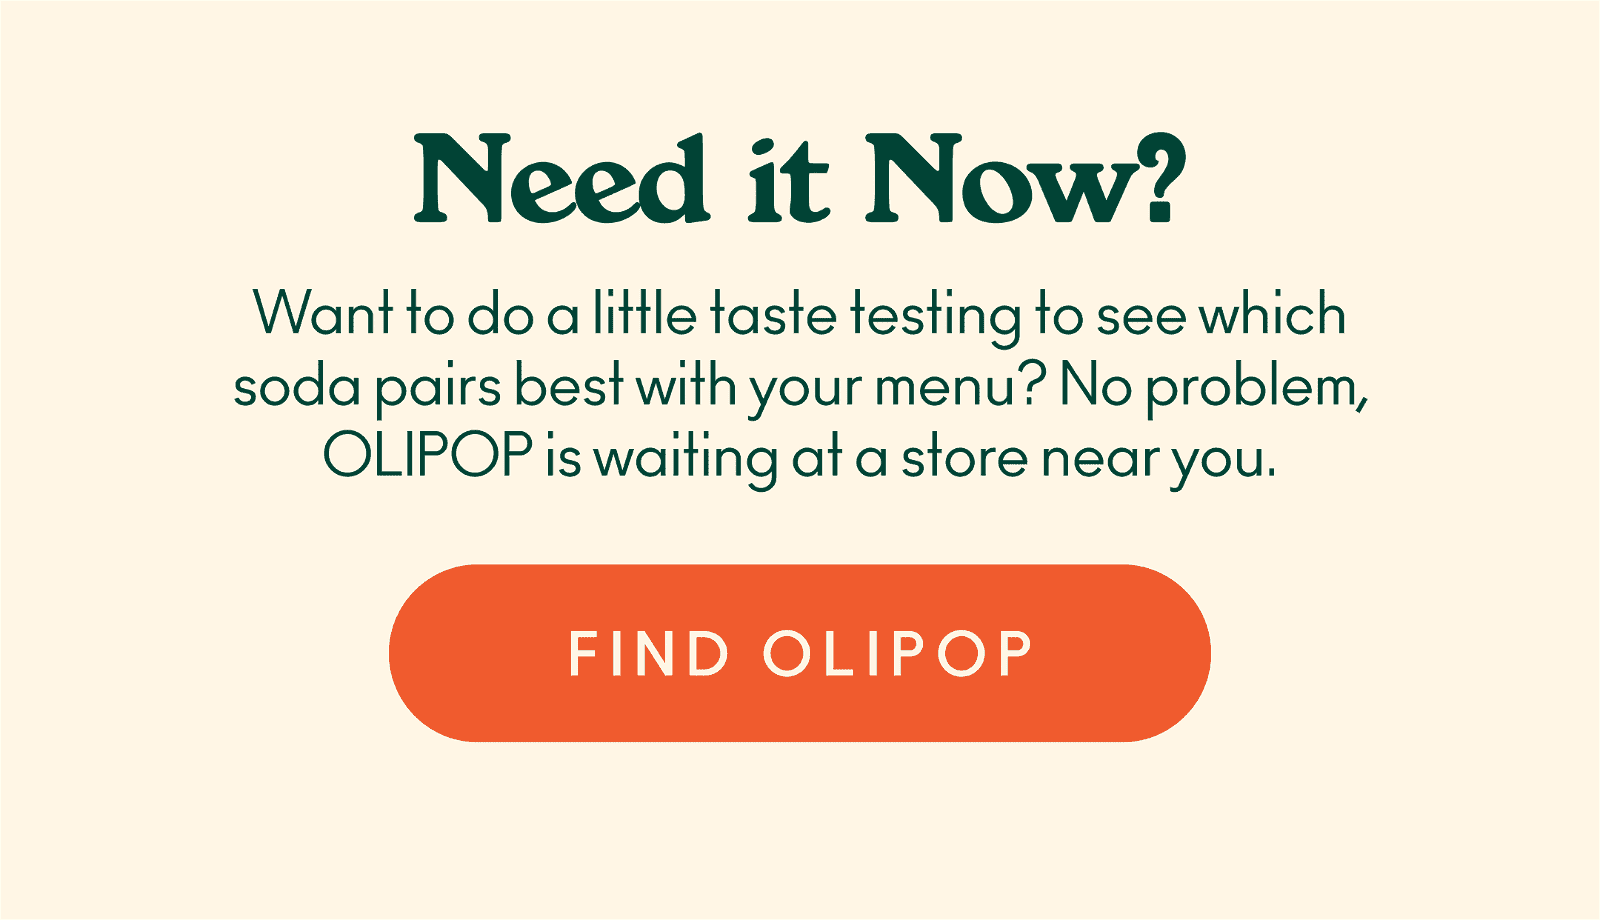 Need it now? No problem, OLIPOP is waiting at a store near you.